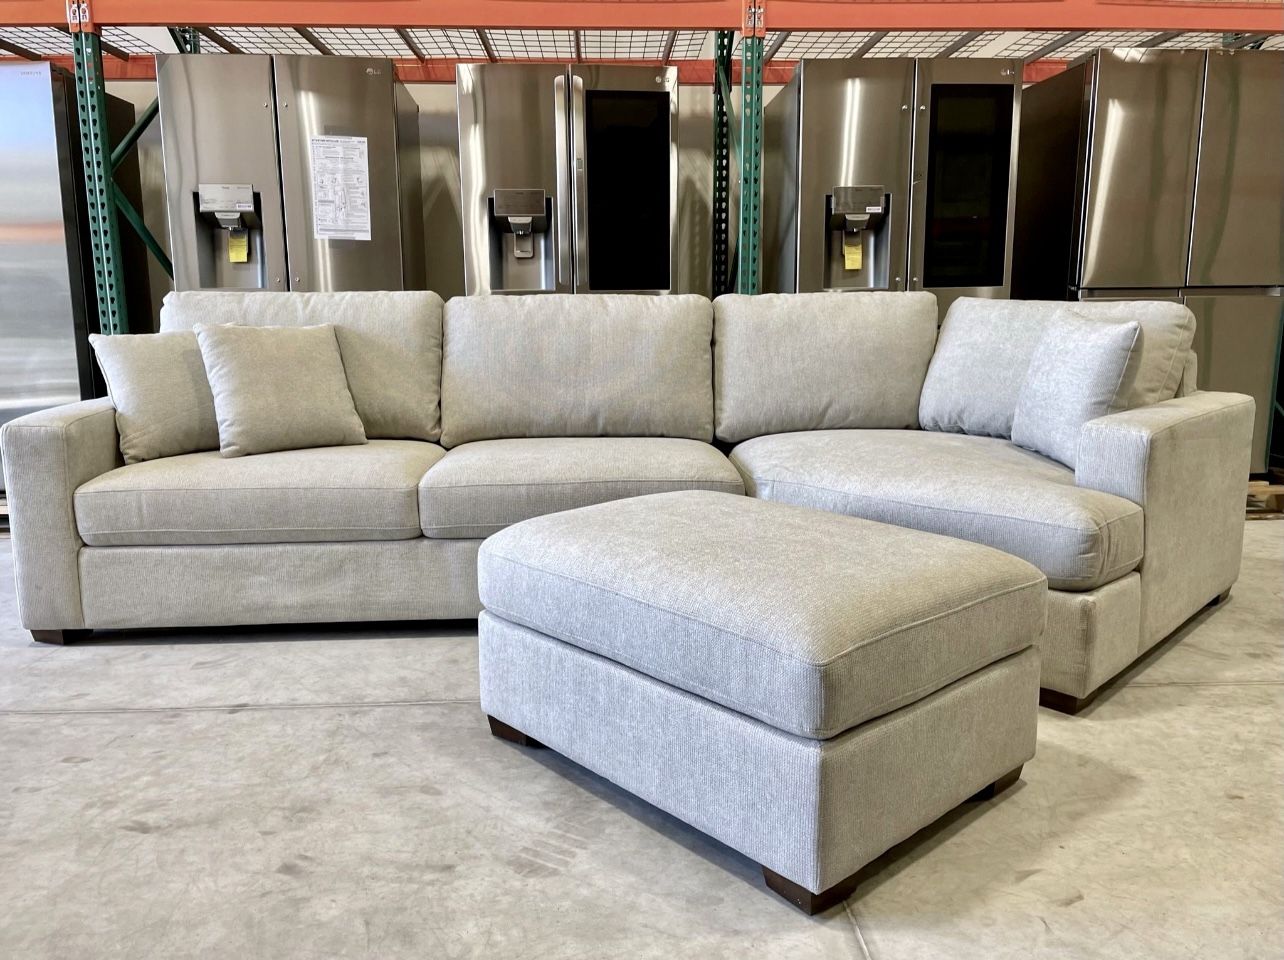 Free Delivery Brand New Thomasville Ezra Light Gray Fabric Sectional with Ottoman [Costco $1799+tax]